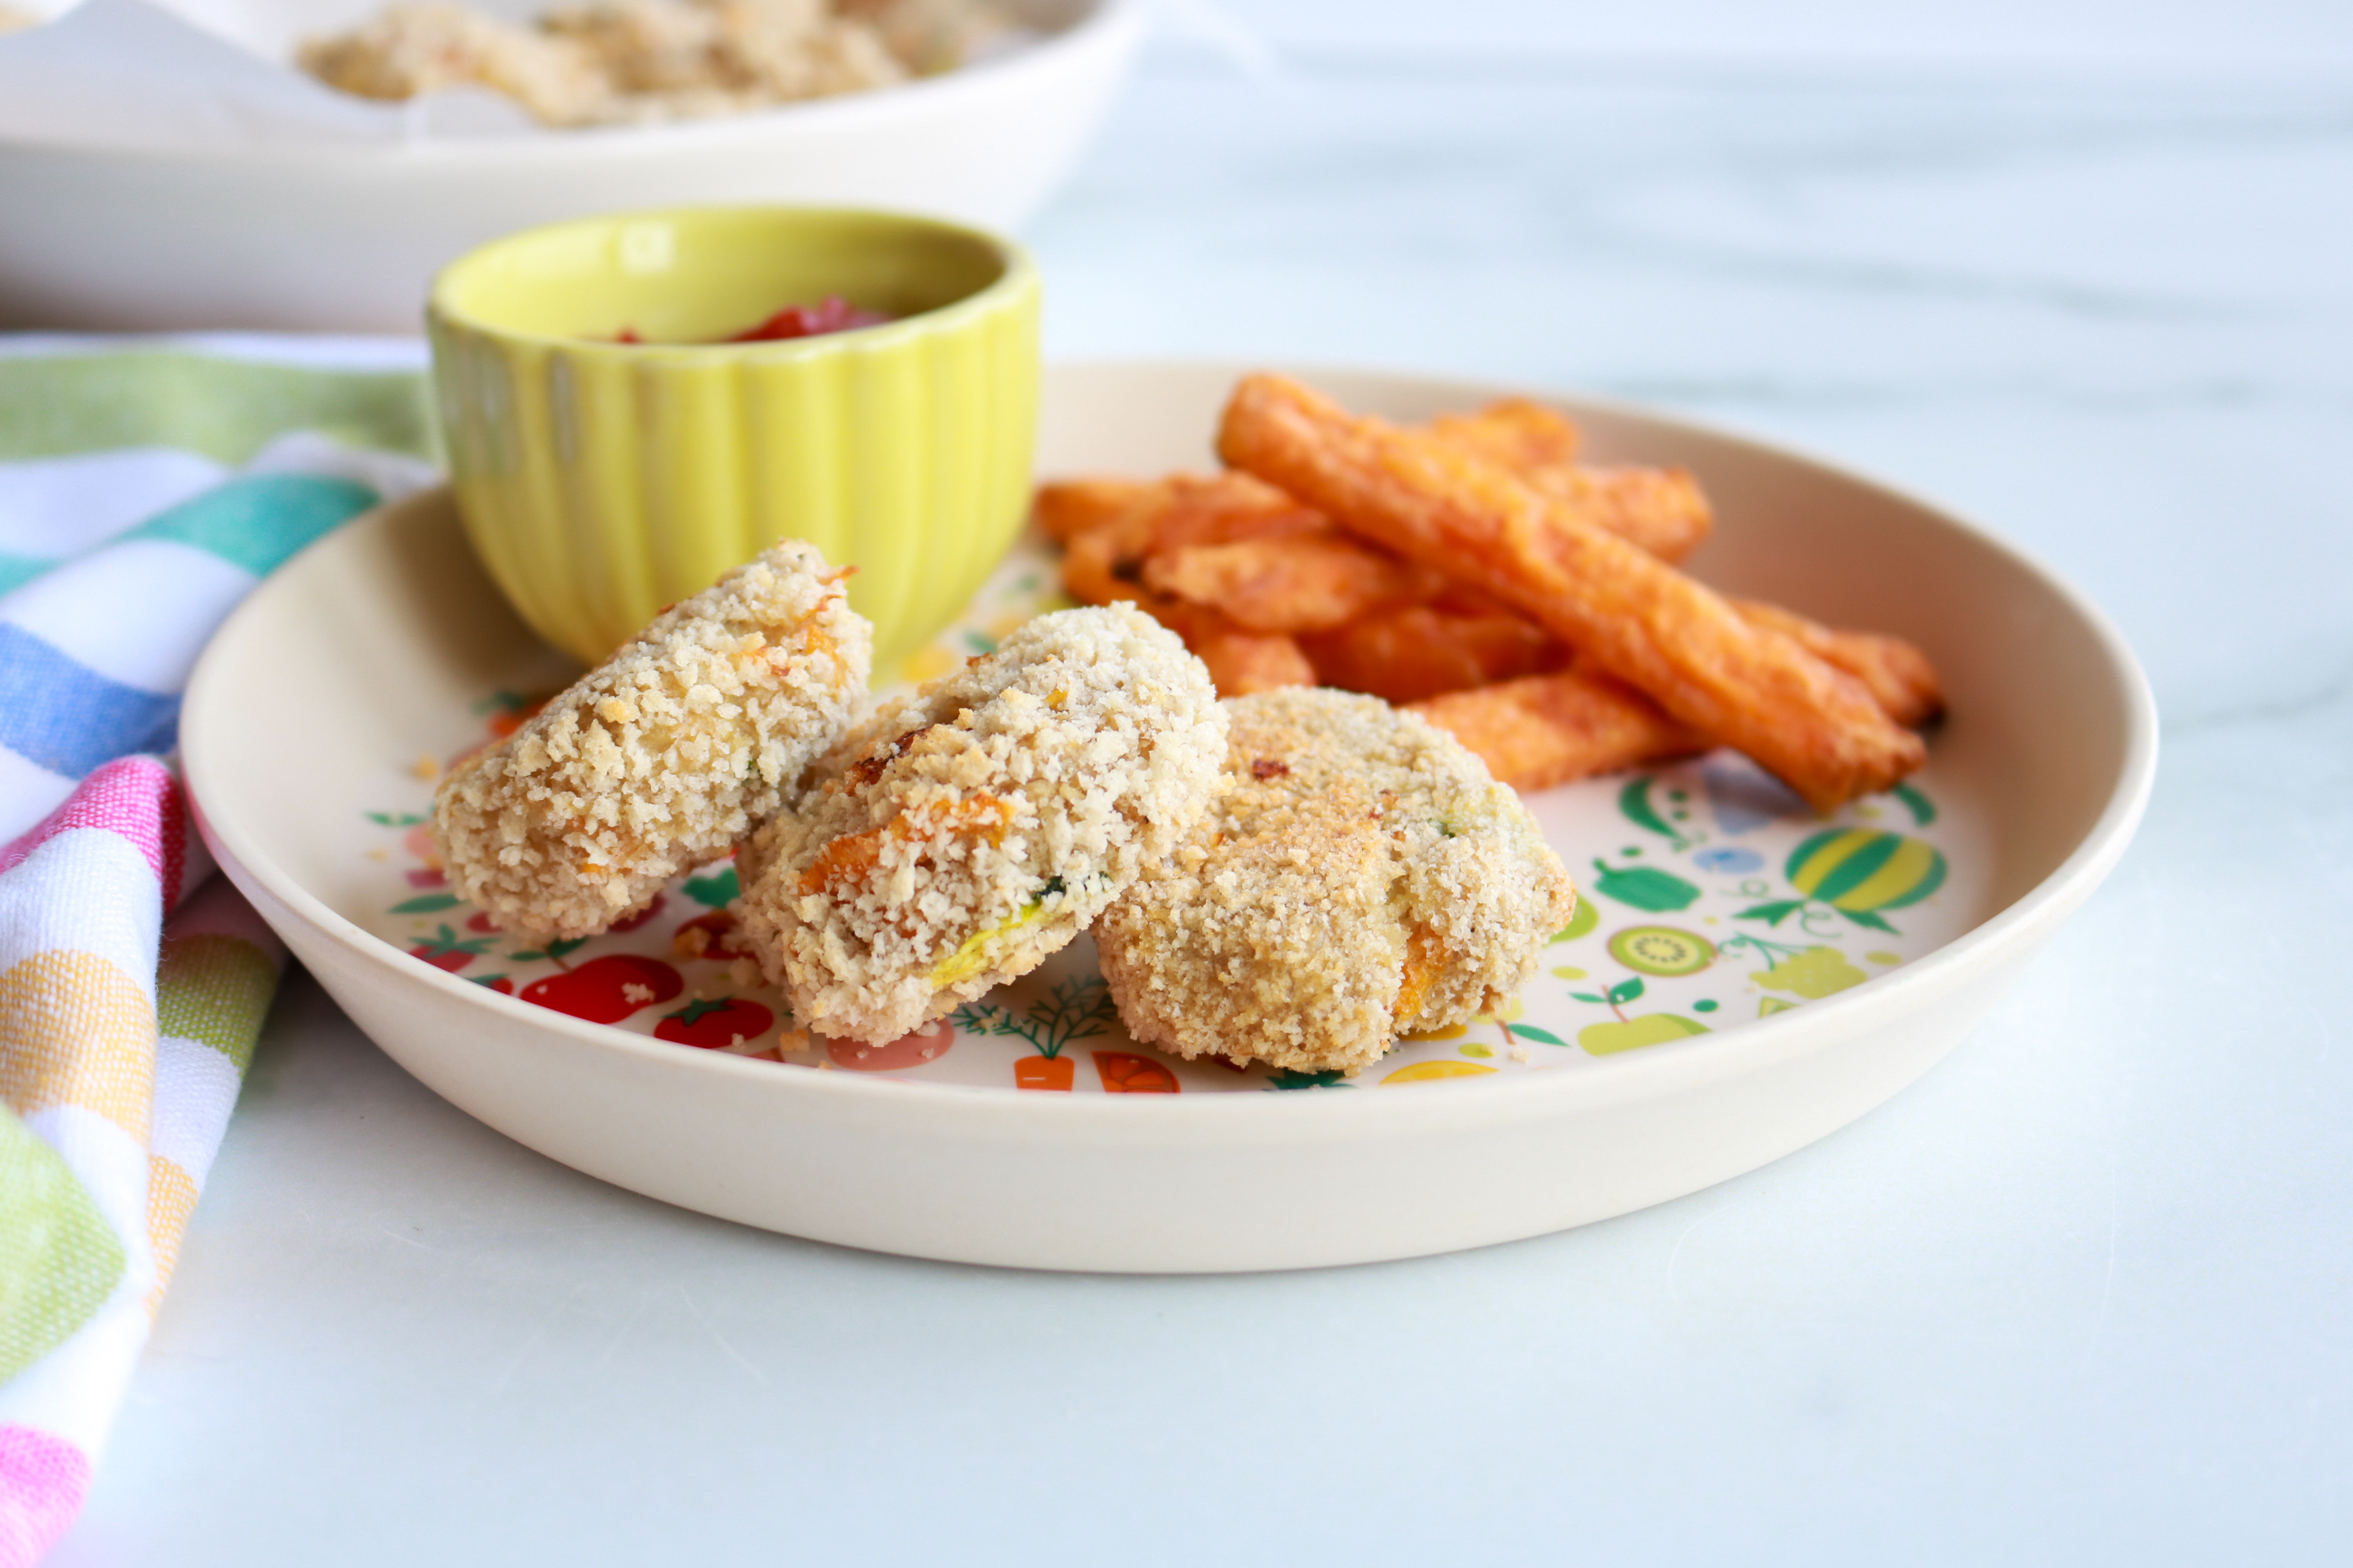 Healthy Chicken Nuggets with Veggies - MJ and Hungryman